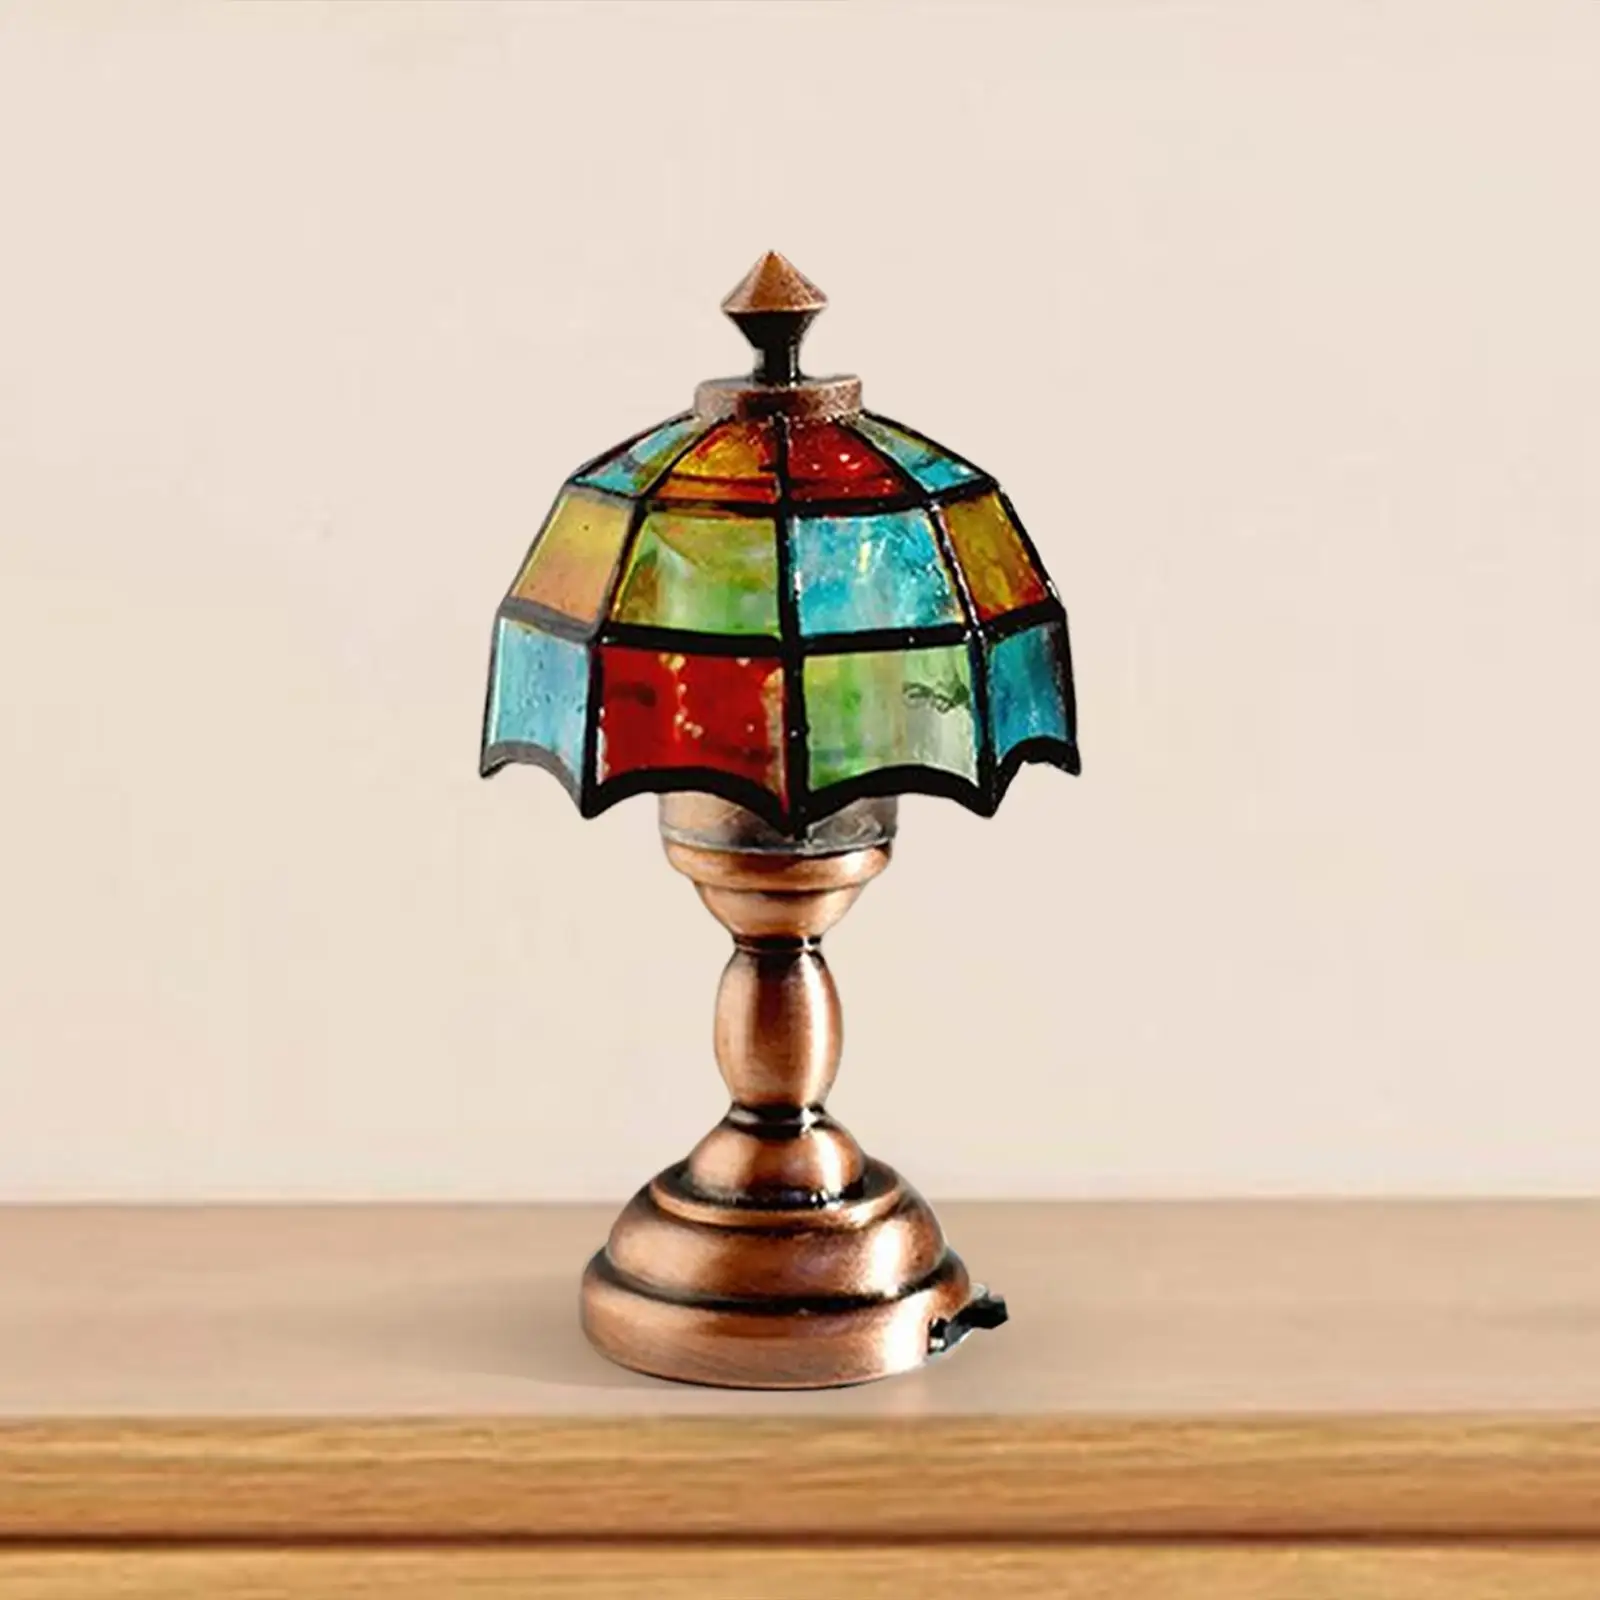 Miniature Dollhouse Table Lamp Living Room Accessories Toys Micro Landscape Bedroom Home Life Scene 1:12 Scale Decoration